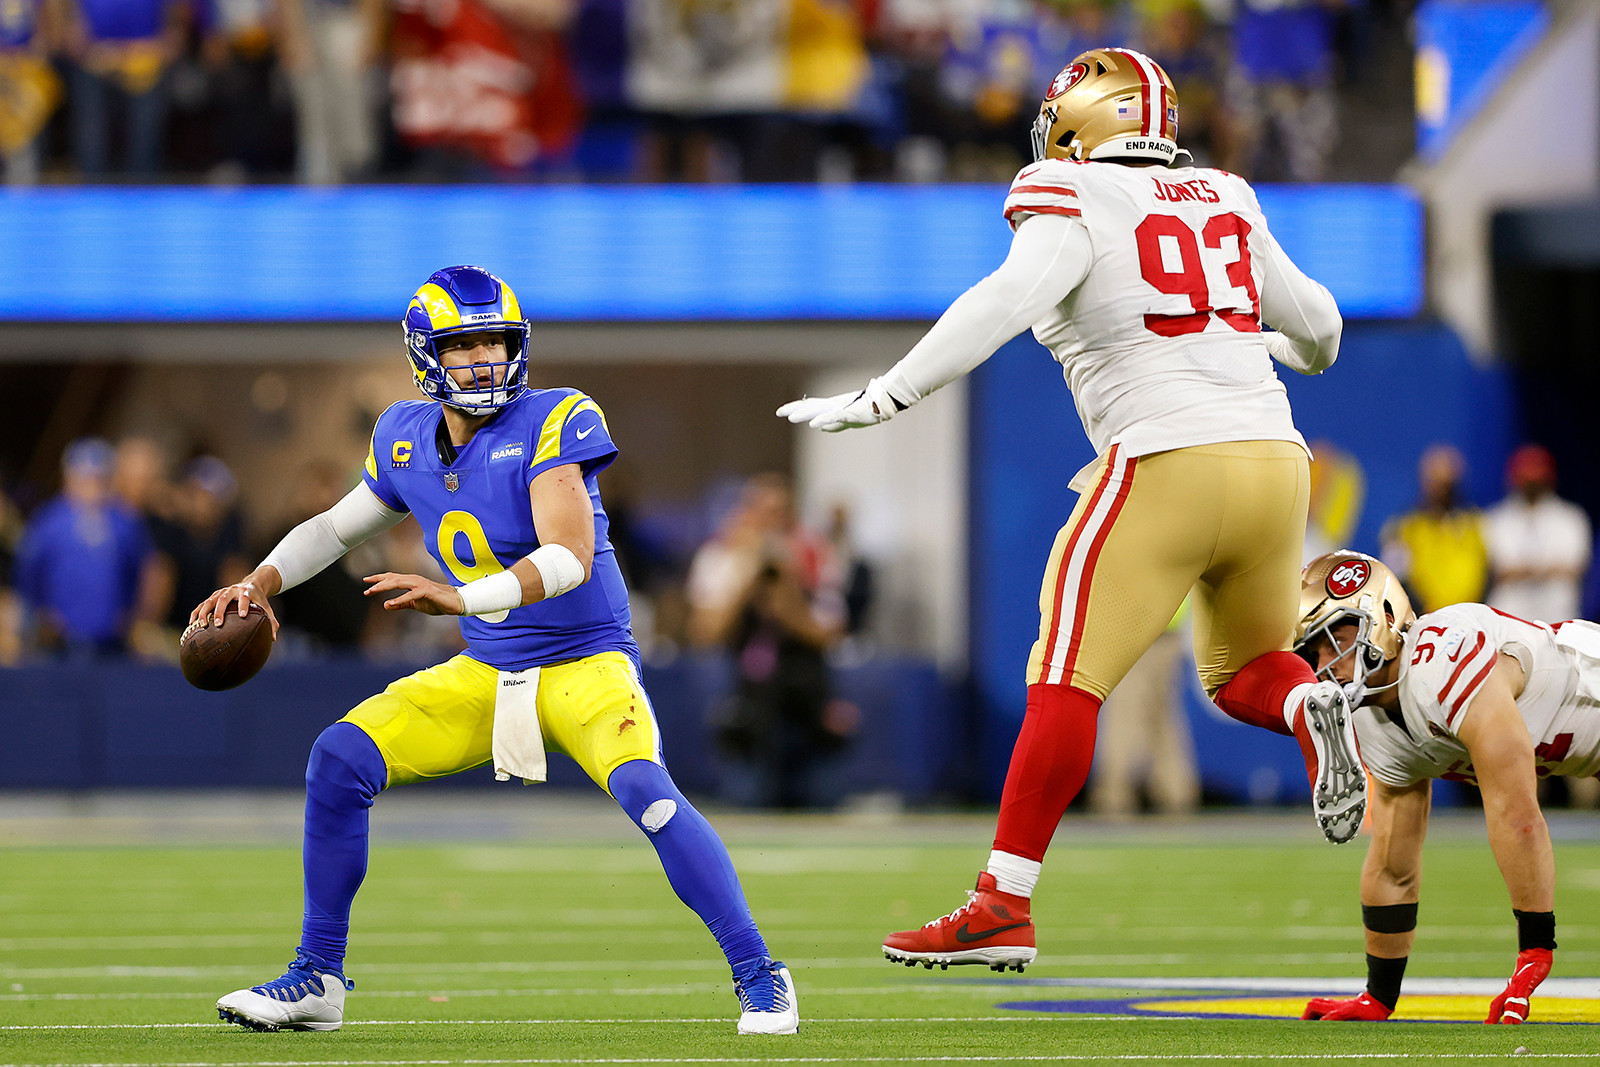 In NFC Championship game, the Rams finally take down the 49ers, 20-17